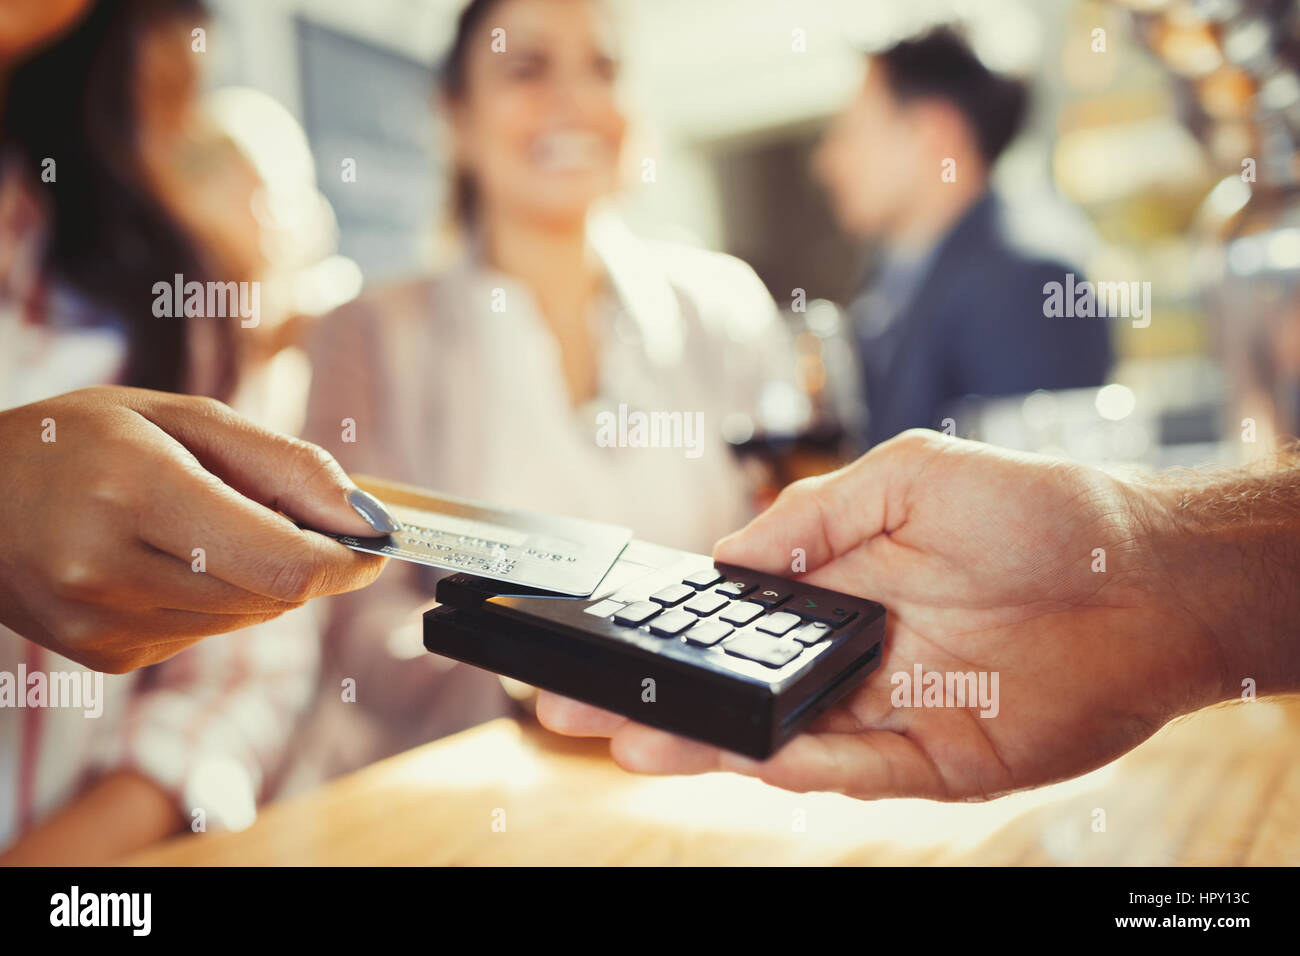 Woman with credit card paying bartender with contactless payment at bar Stock Photo